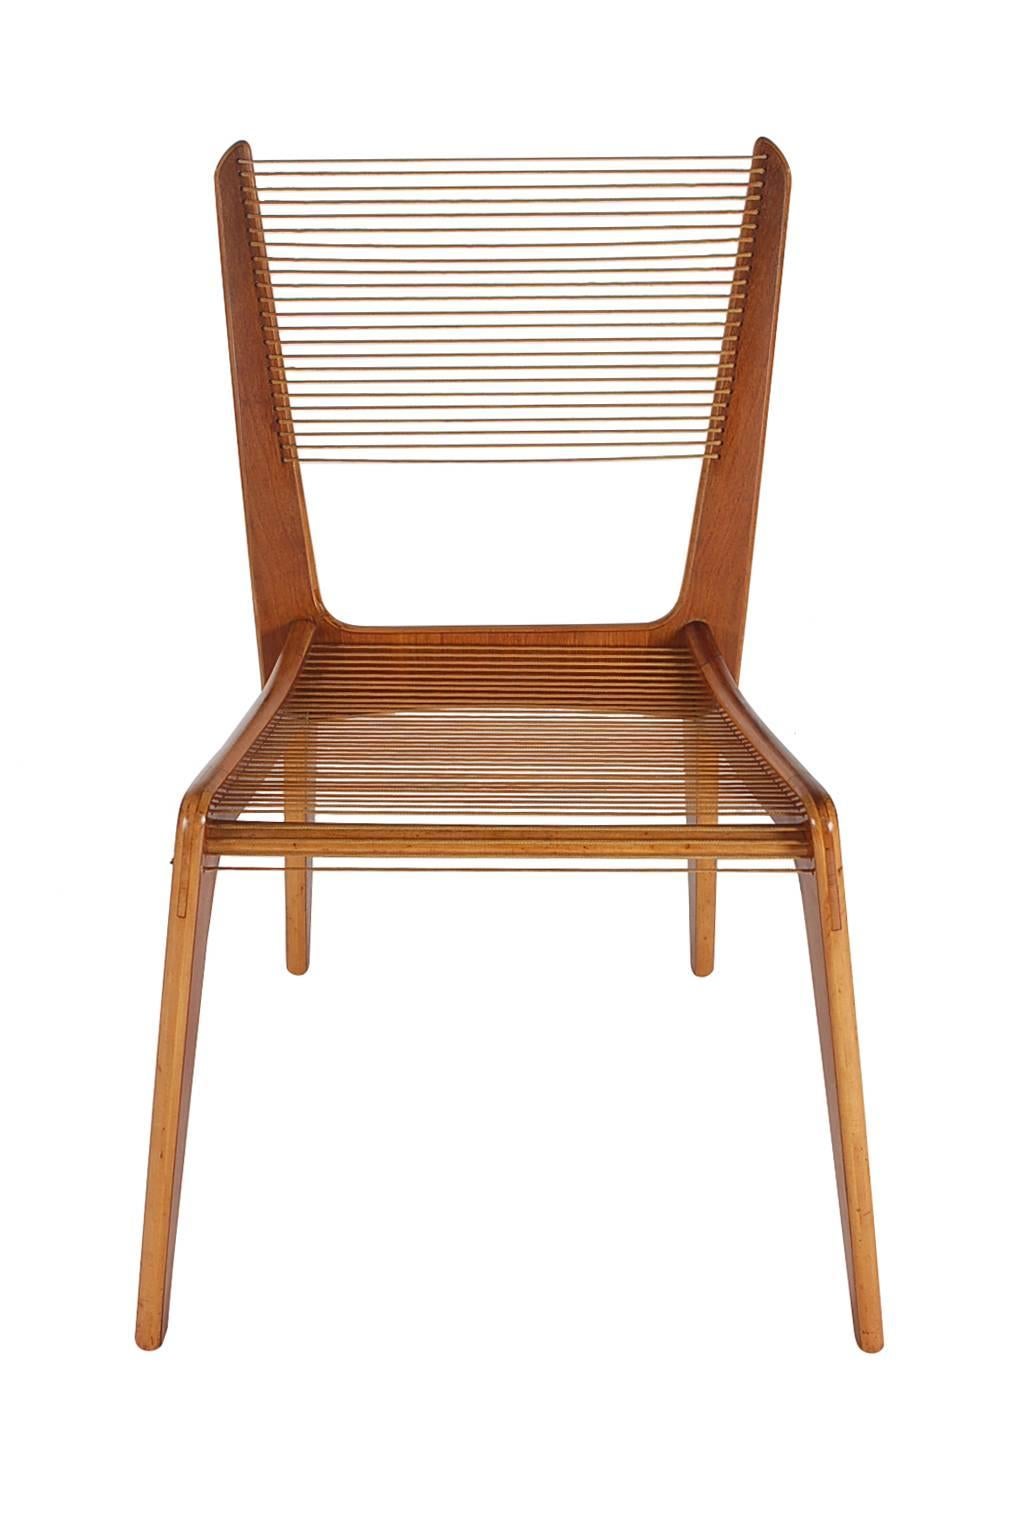 An early and very uncommon set of cord chairs designed by Jacques Gillion and produced in Canada in the 1950s. They have a beautiful two tone wood design, and are unexpectedly sturdy and very comfortable.